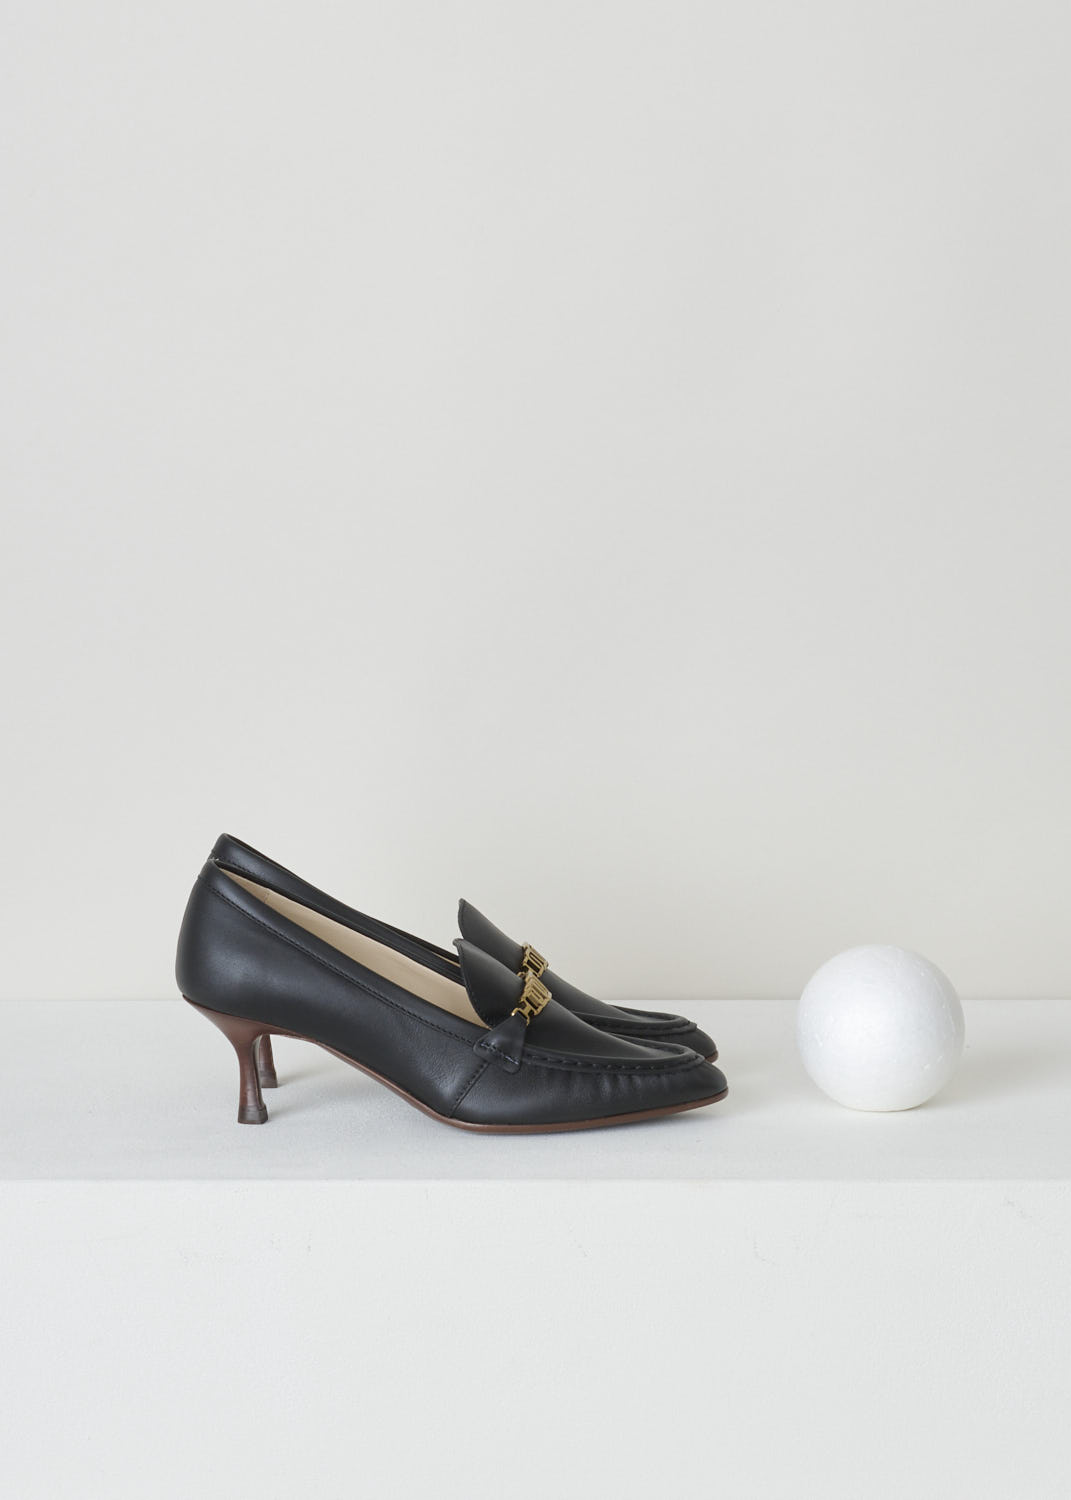 TODS, BLACK LEATHER LOAFERS WITH A TRAPEZOID HEEL, XXW09D0EC80_MID_B999_NERO, Black, Side, Black leather loafers with a wooden trapezoid heel. This model has a pointed toe and a gold-toned buckle decorating the front. Around the trim, subtle pleats can be found.


Heel height: 6 cm / 2.3 inch.